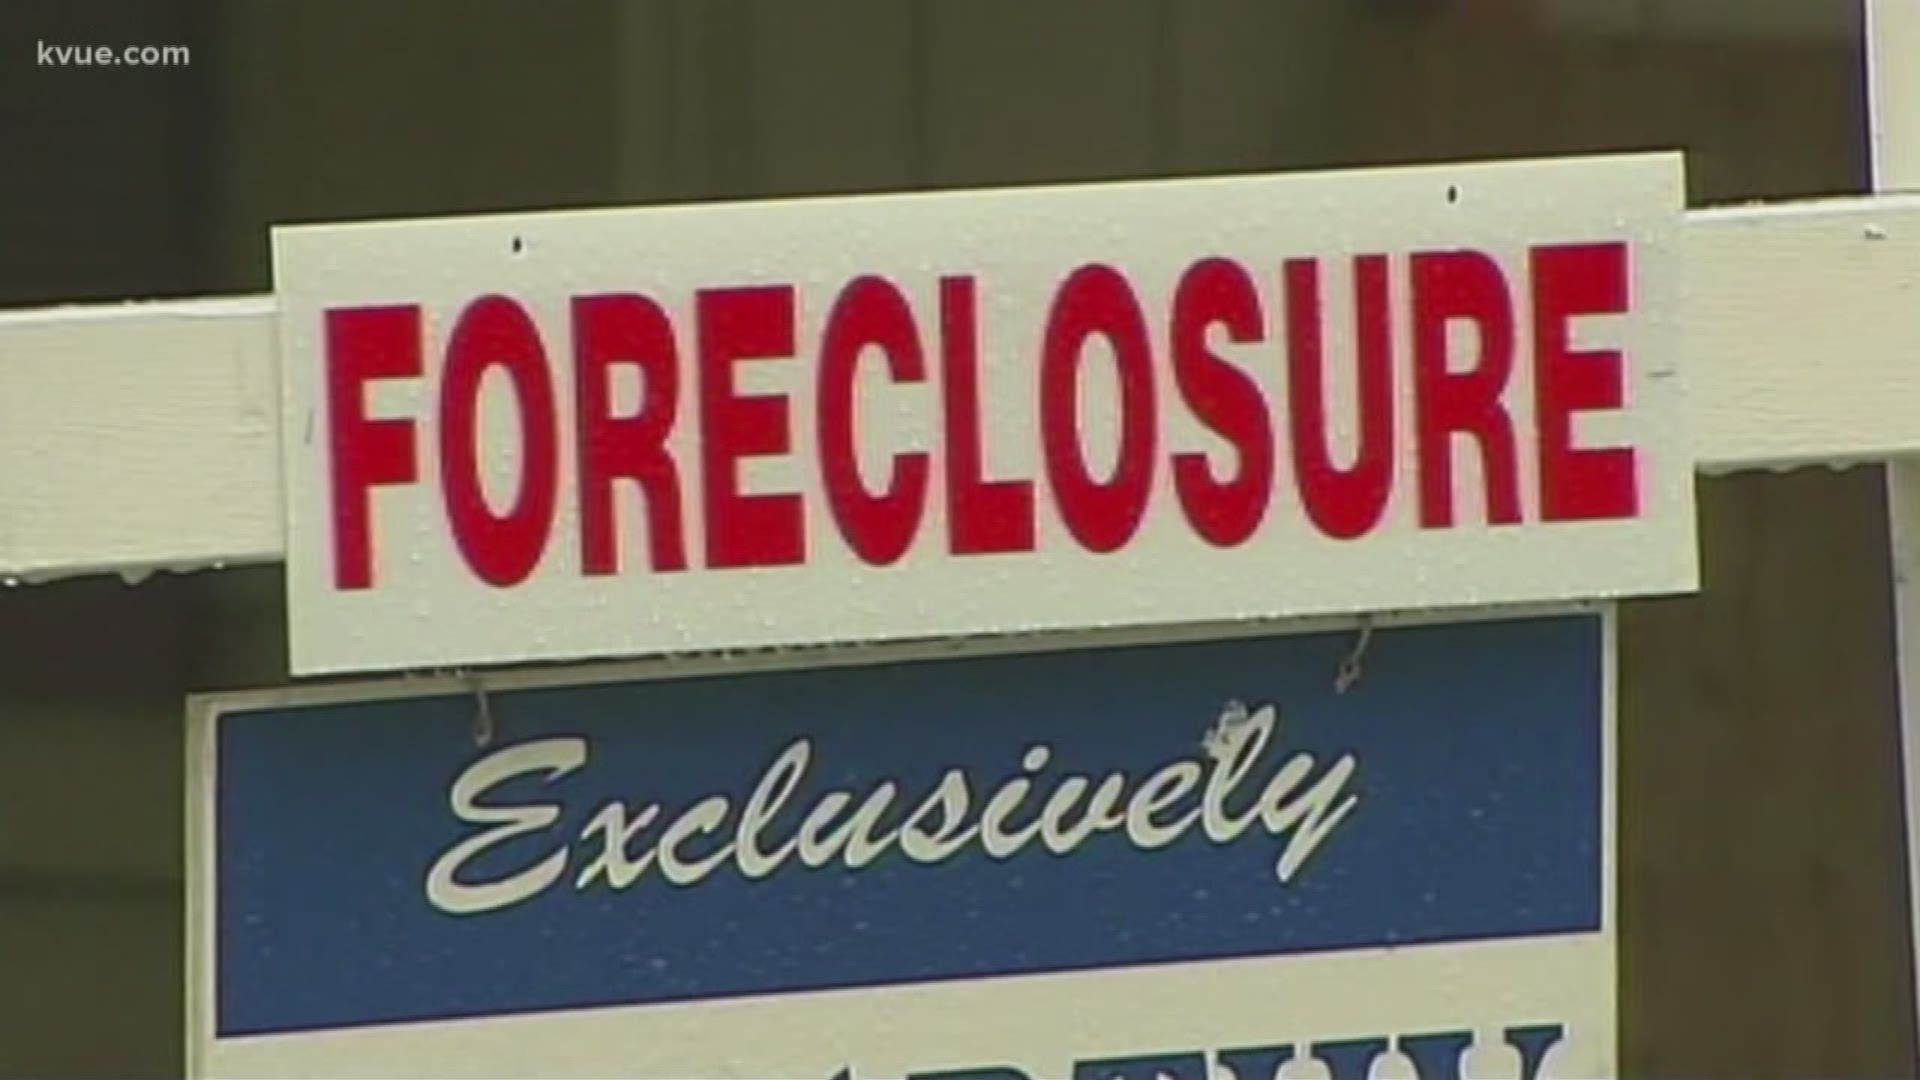 The headline references an 'alarming new report' showing a jump in home foreclosures in Austin.